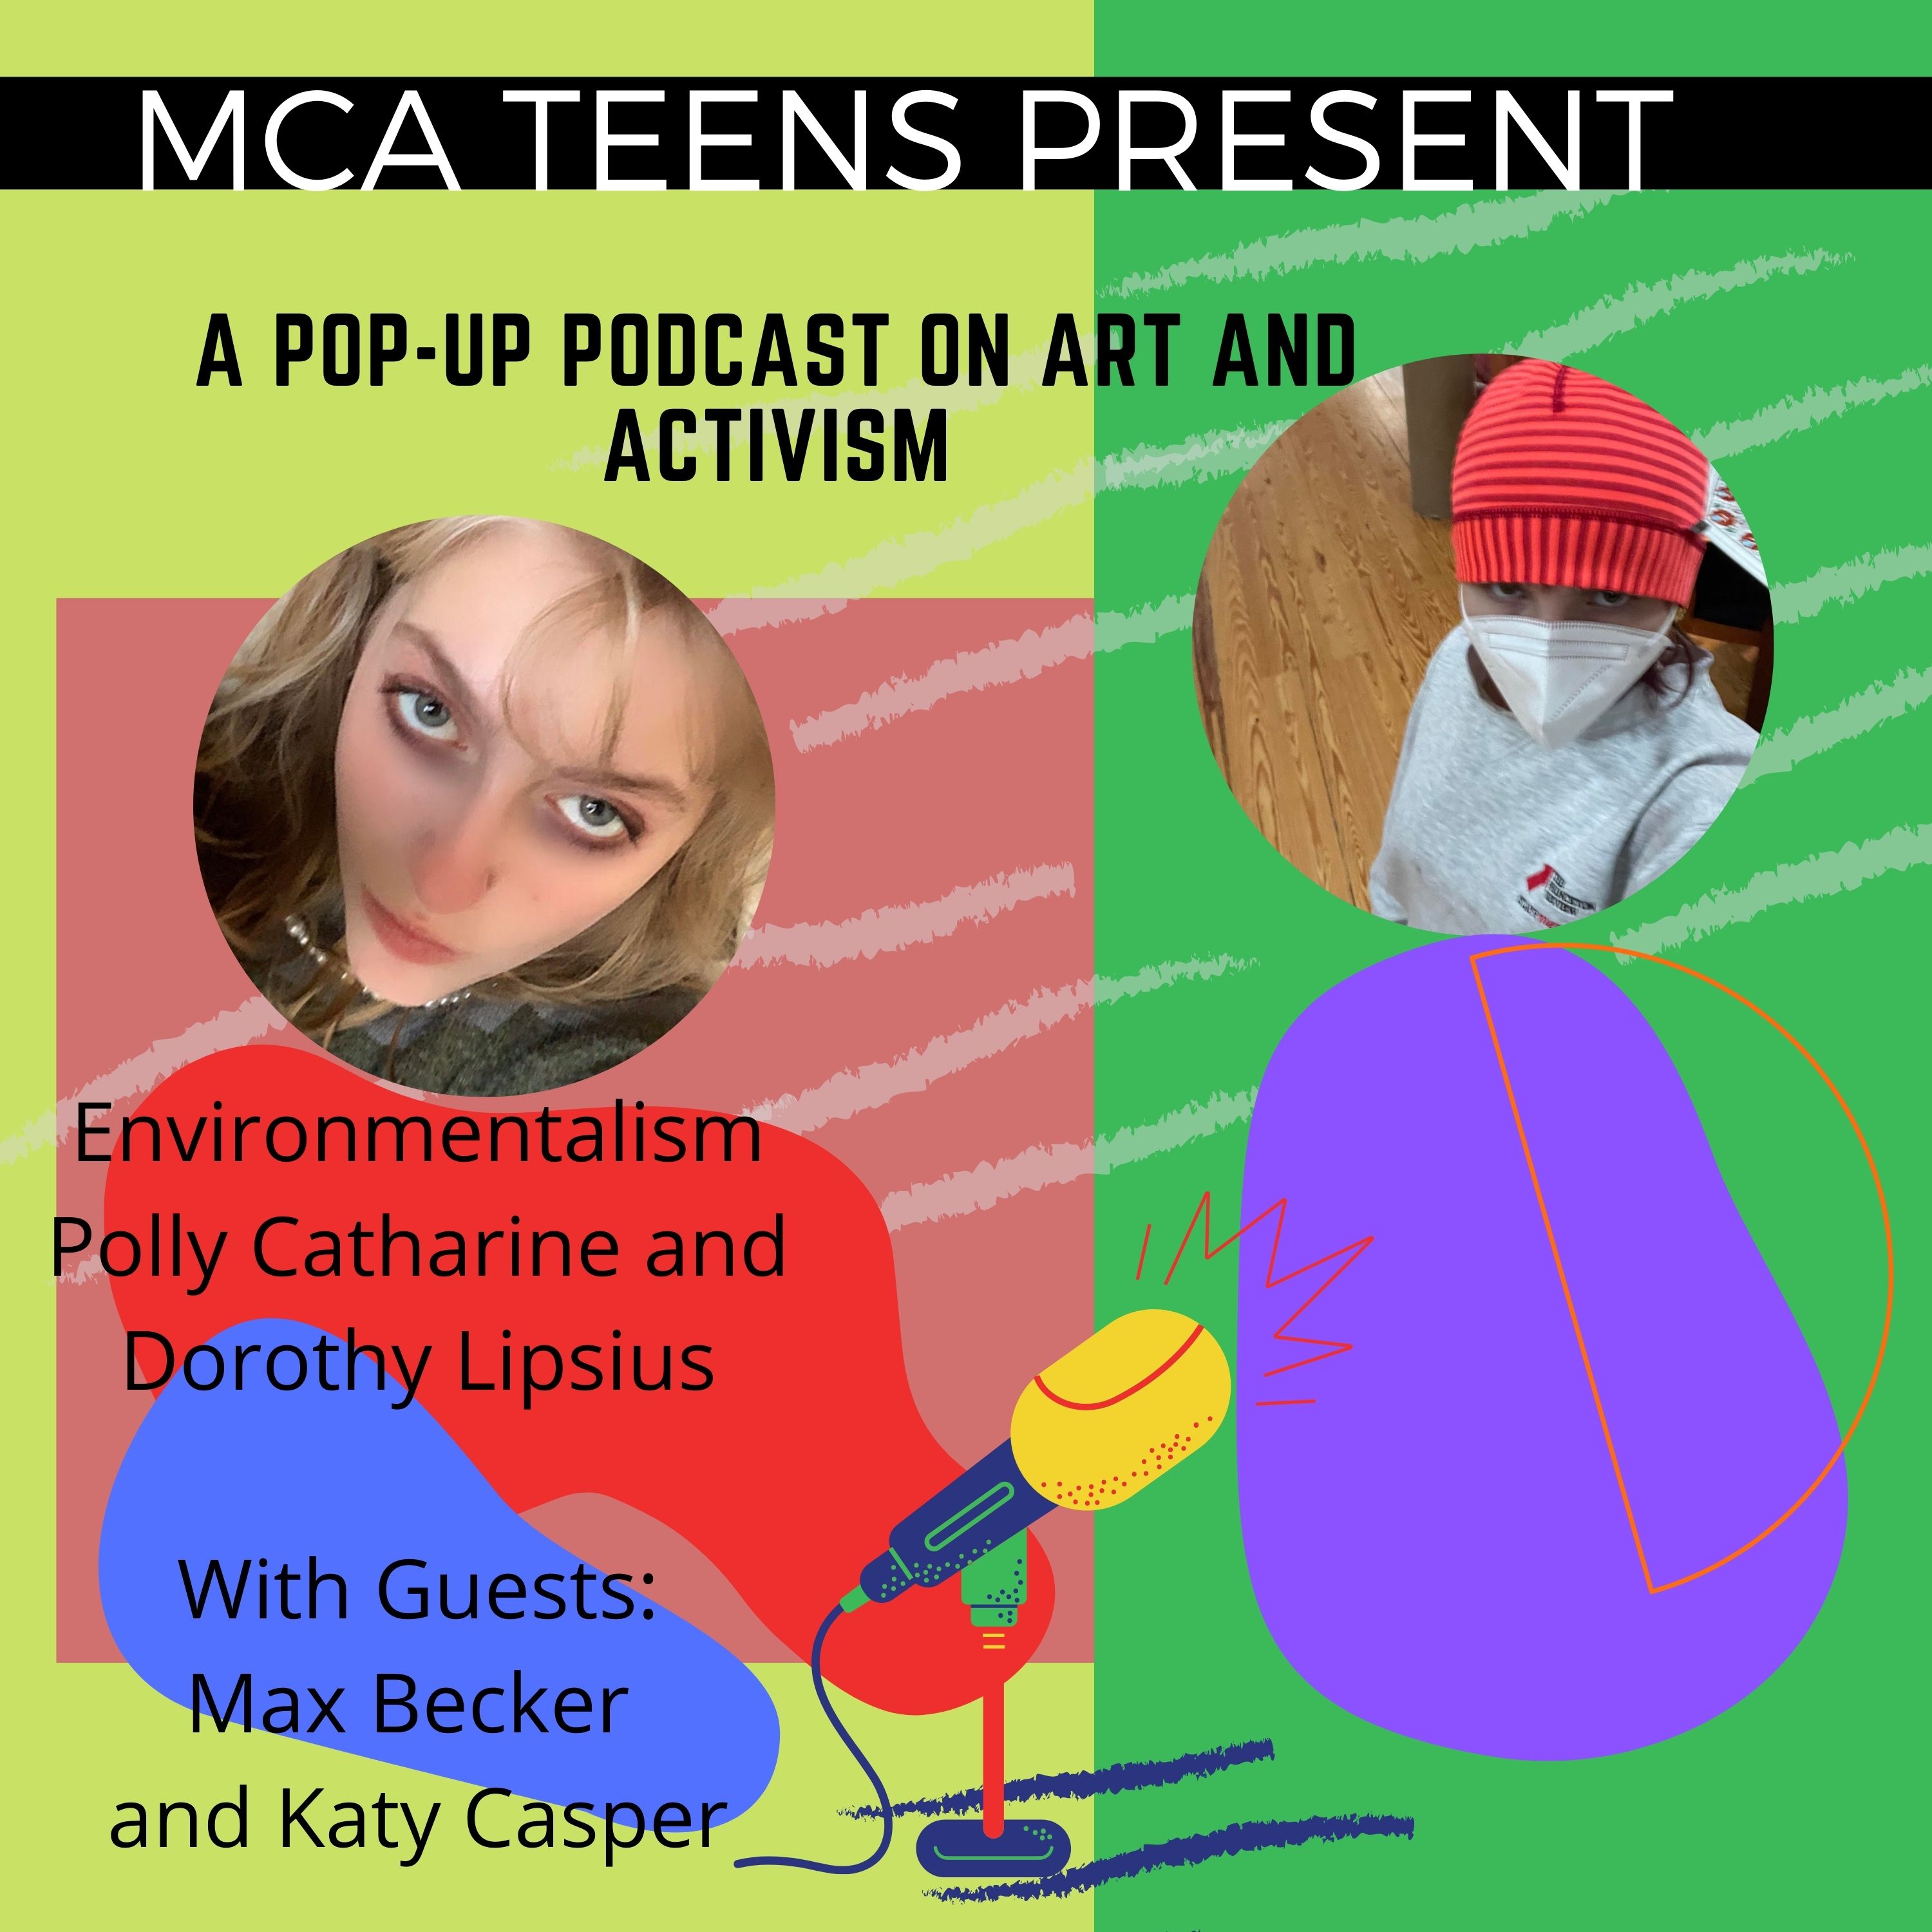 MCA Teens present a pop-up podcast on art and activism. Environmentalism hosted by Polly Catharine and Dorothy Lipsius with guests Max Becker and Katy Casper.